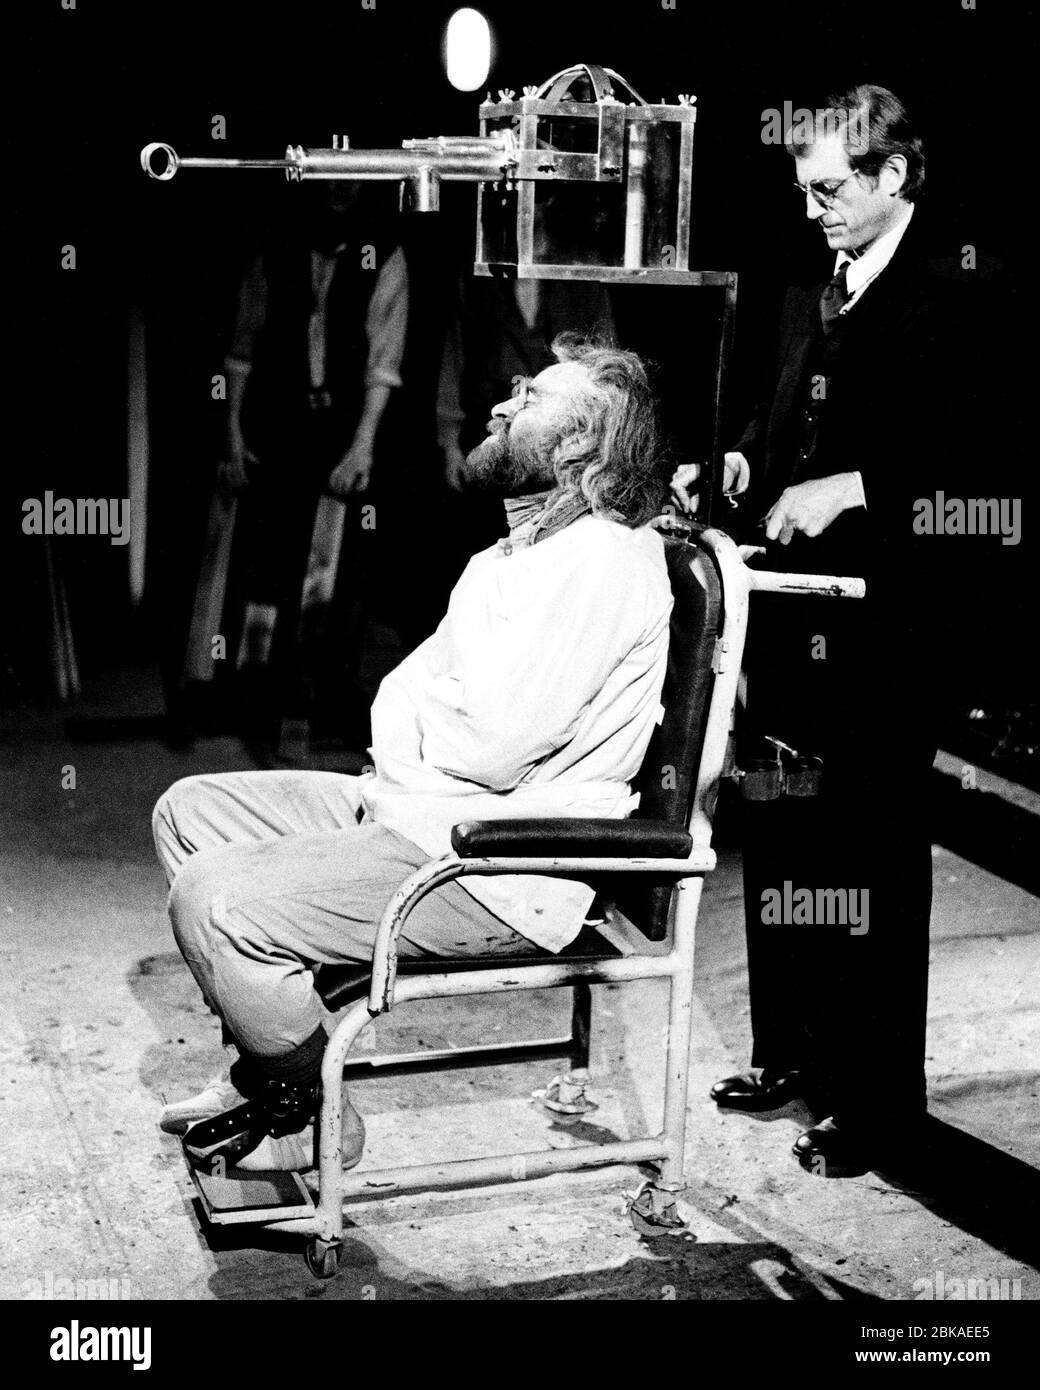 l-r: Bob Peck (Lear), David Bradley (Prison Doctor) in LEAR von Edward Bond nach Shakespeares 'King Lear' Royal Shakespeare Company (RSC), The Other Place, Stratford-upon-Avon, England 29/06/1982 Design: Kit Surrey Beleuchtung: Leo Leibovici Kämpfe: Malcolm Ranson Regie: Barry Kyle Stockfoto